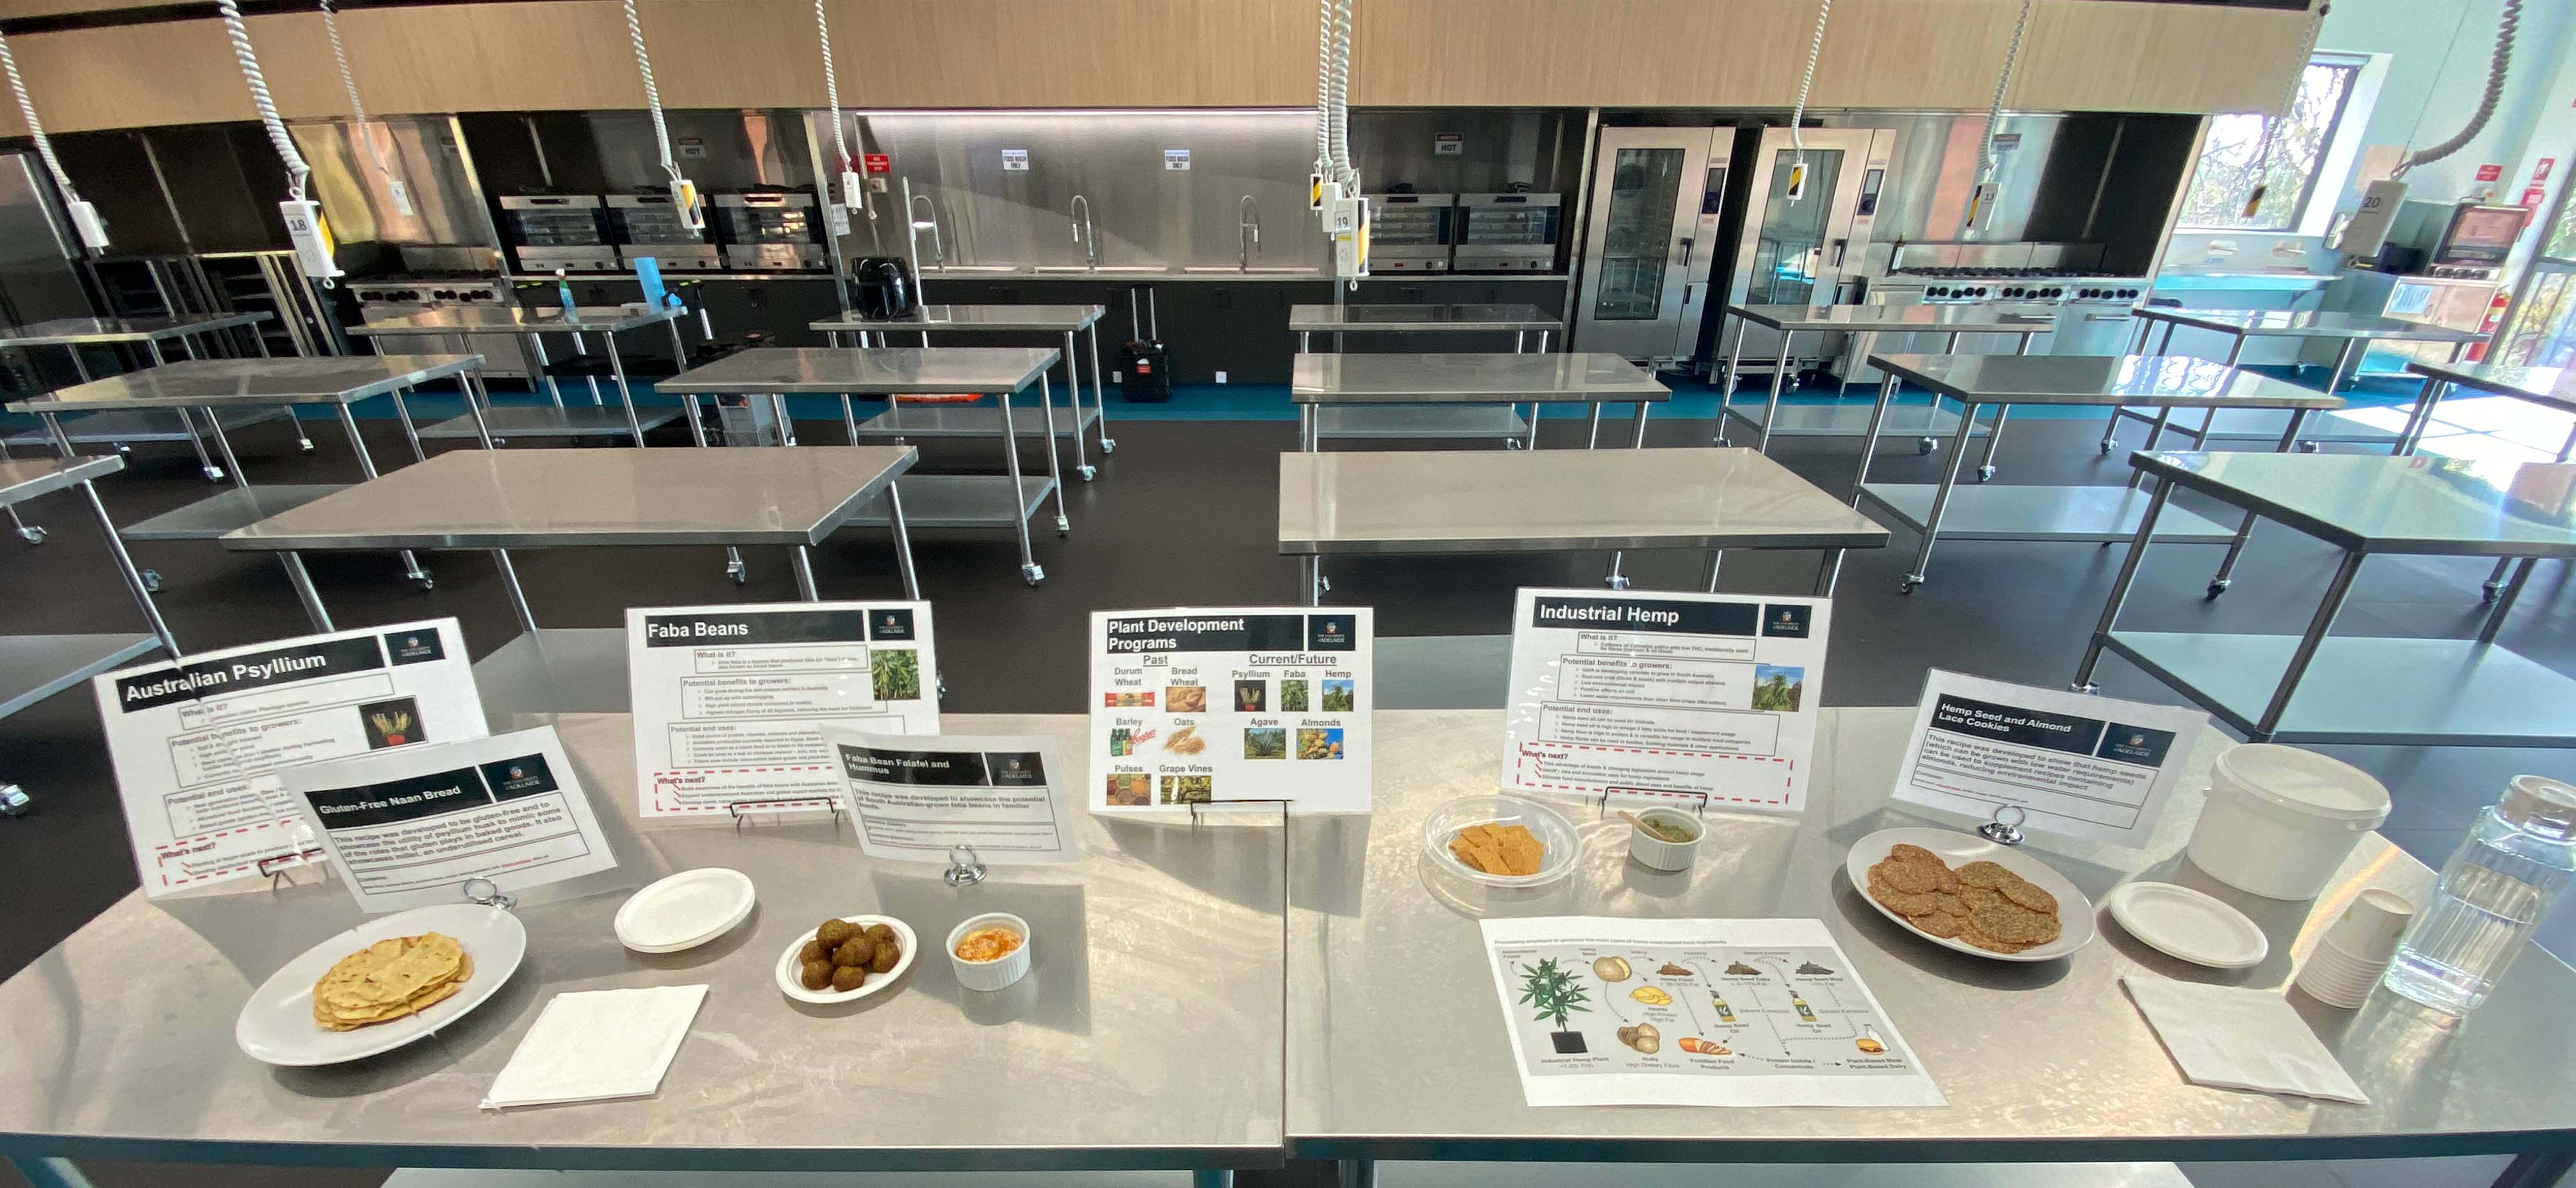 Several food samples arranged on a table for presentation